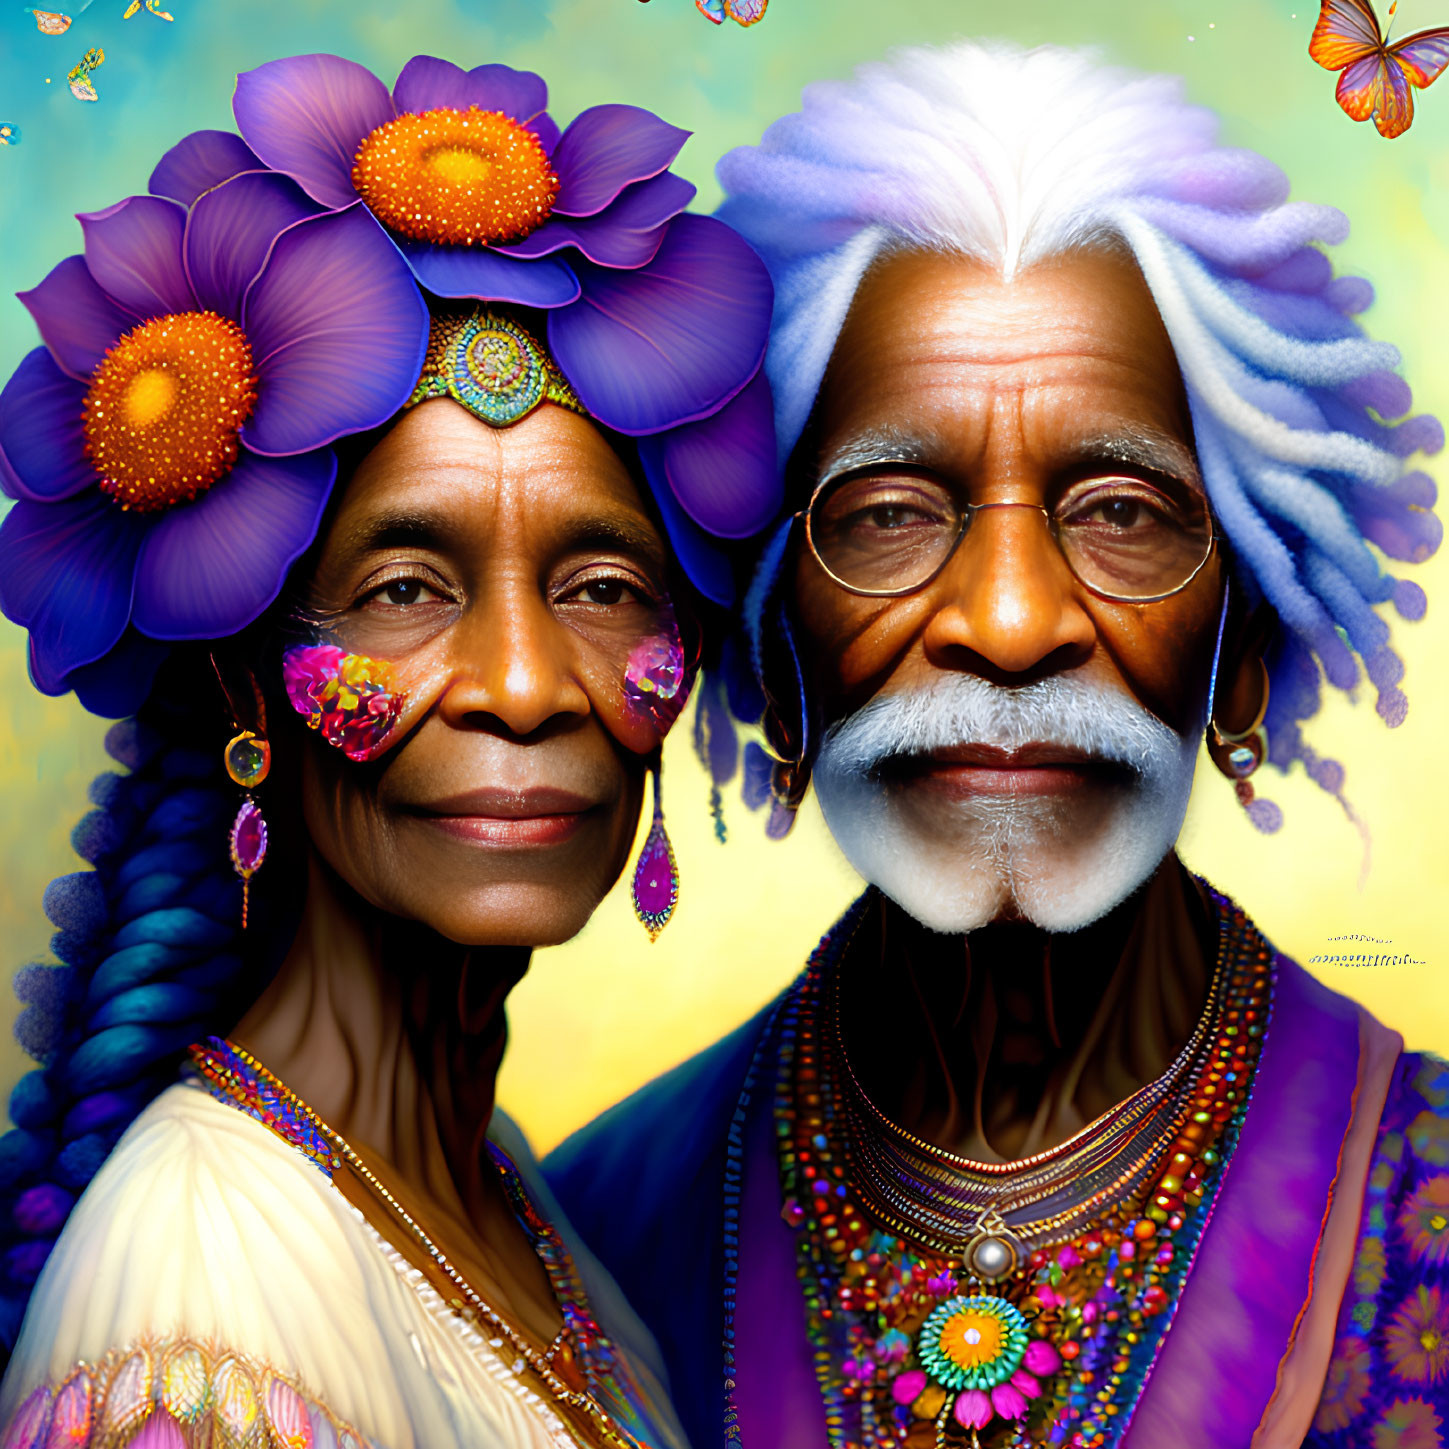 Elderly couple portrait with flowers in hair, colorful attire, exuding wisdom.